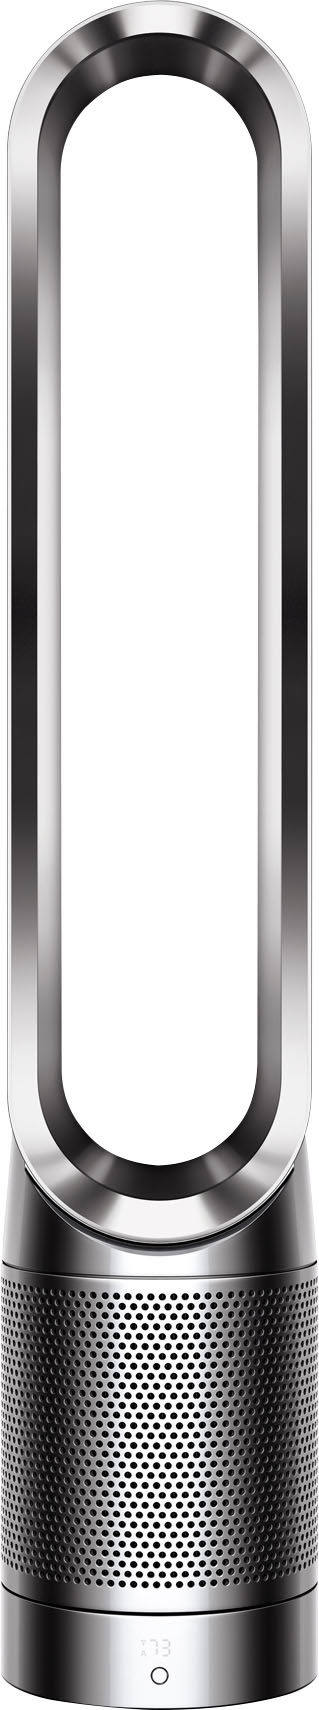 Dyson Pure Cool Link TP02 Smart Tower Purifier and Fan Nickel 308401-01 Buy